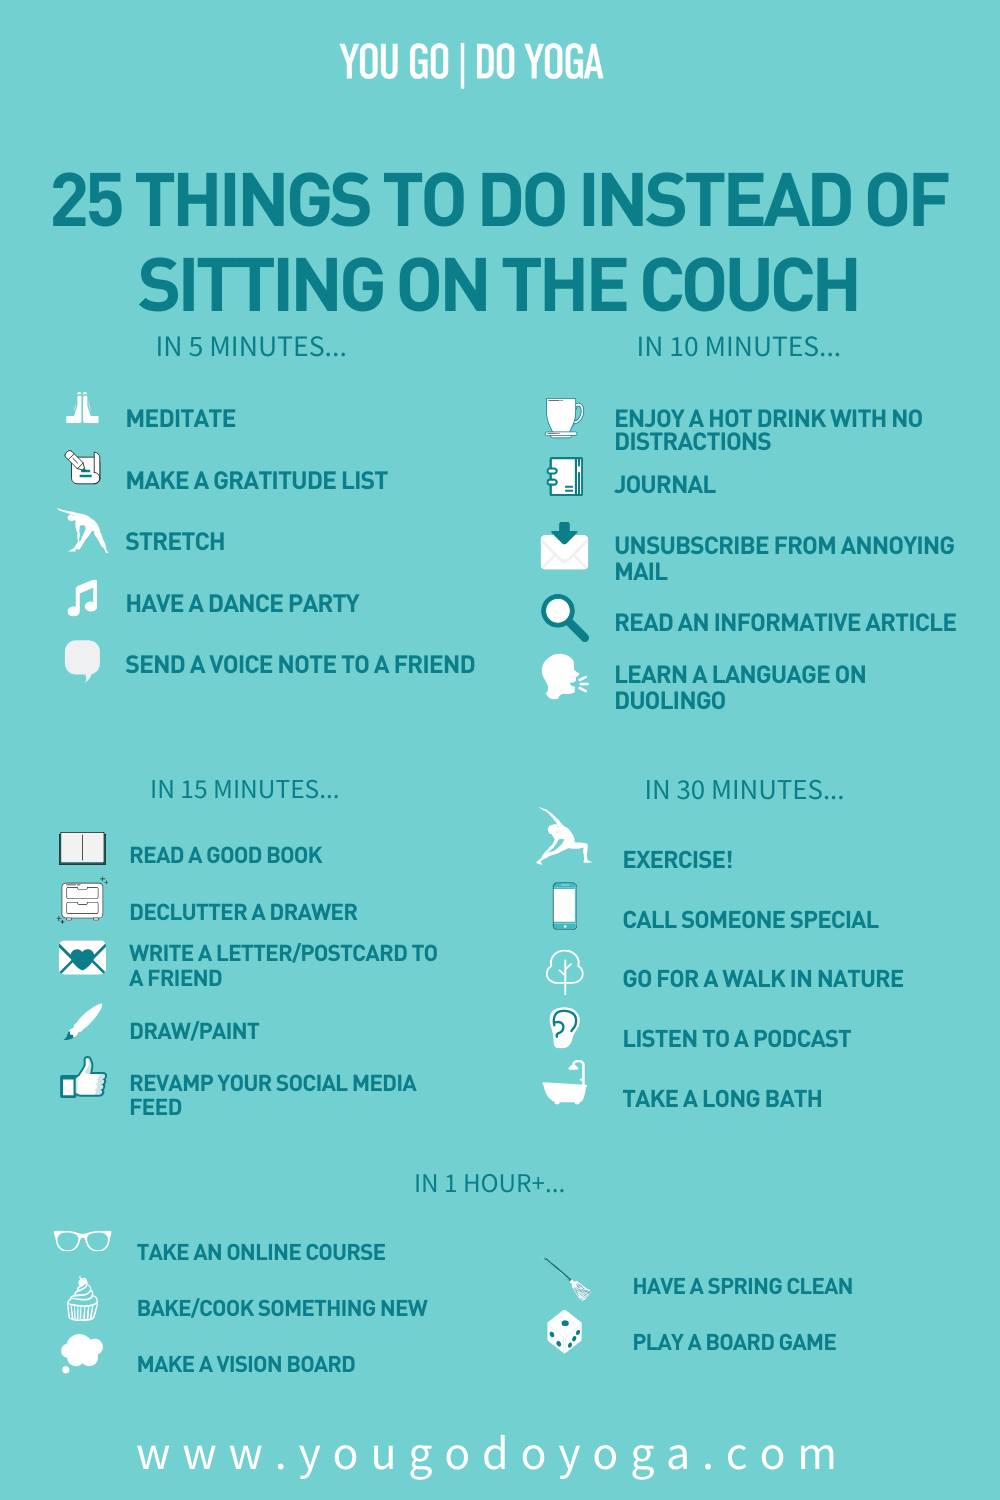 25 things to do instead of sitting on the couch